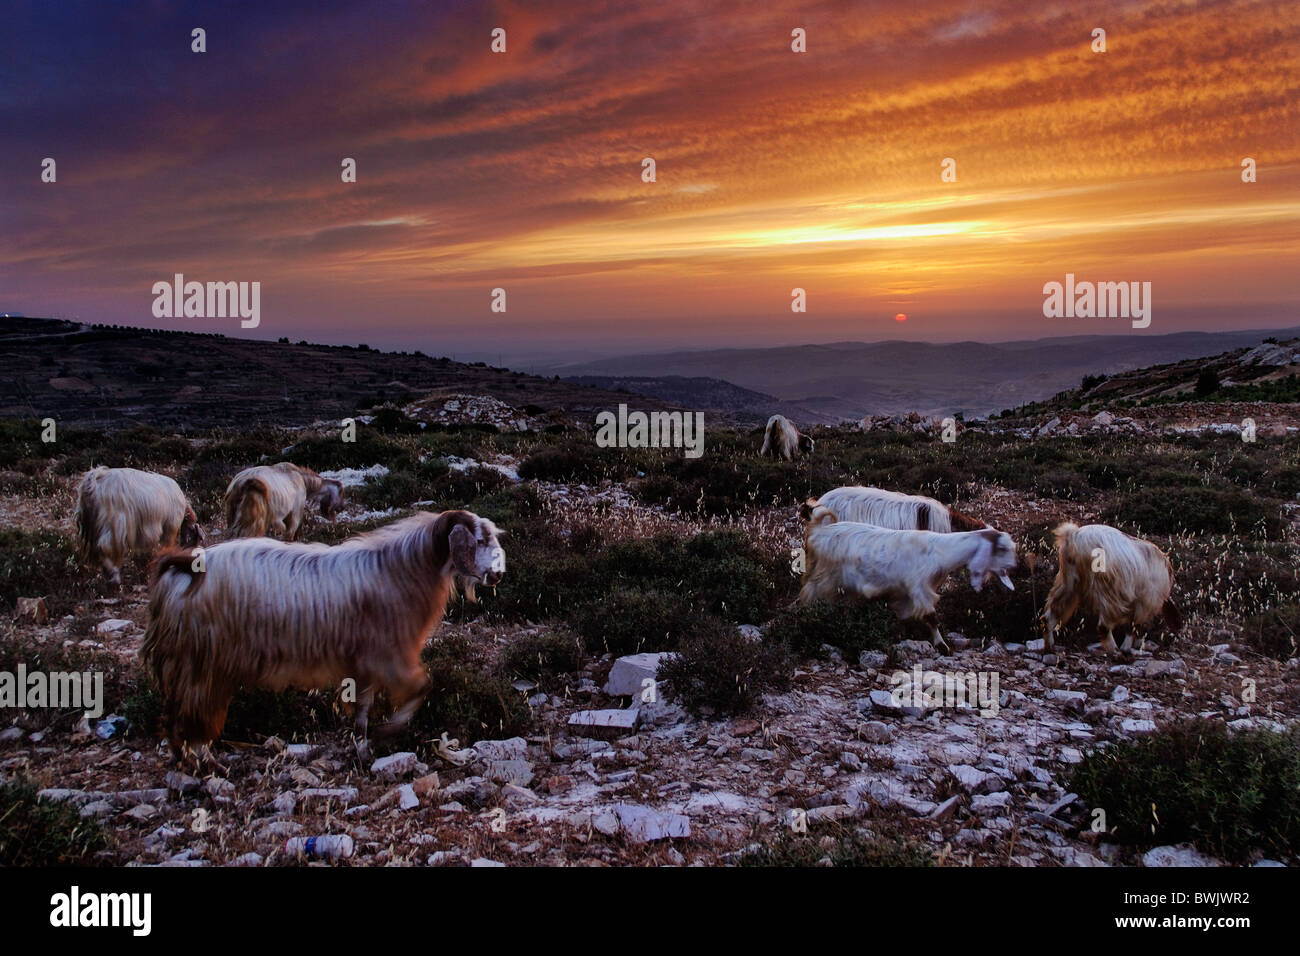 An ancestral landscape with syrian goats Stock Photo